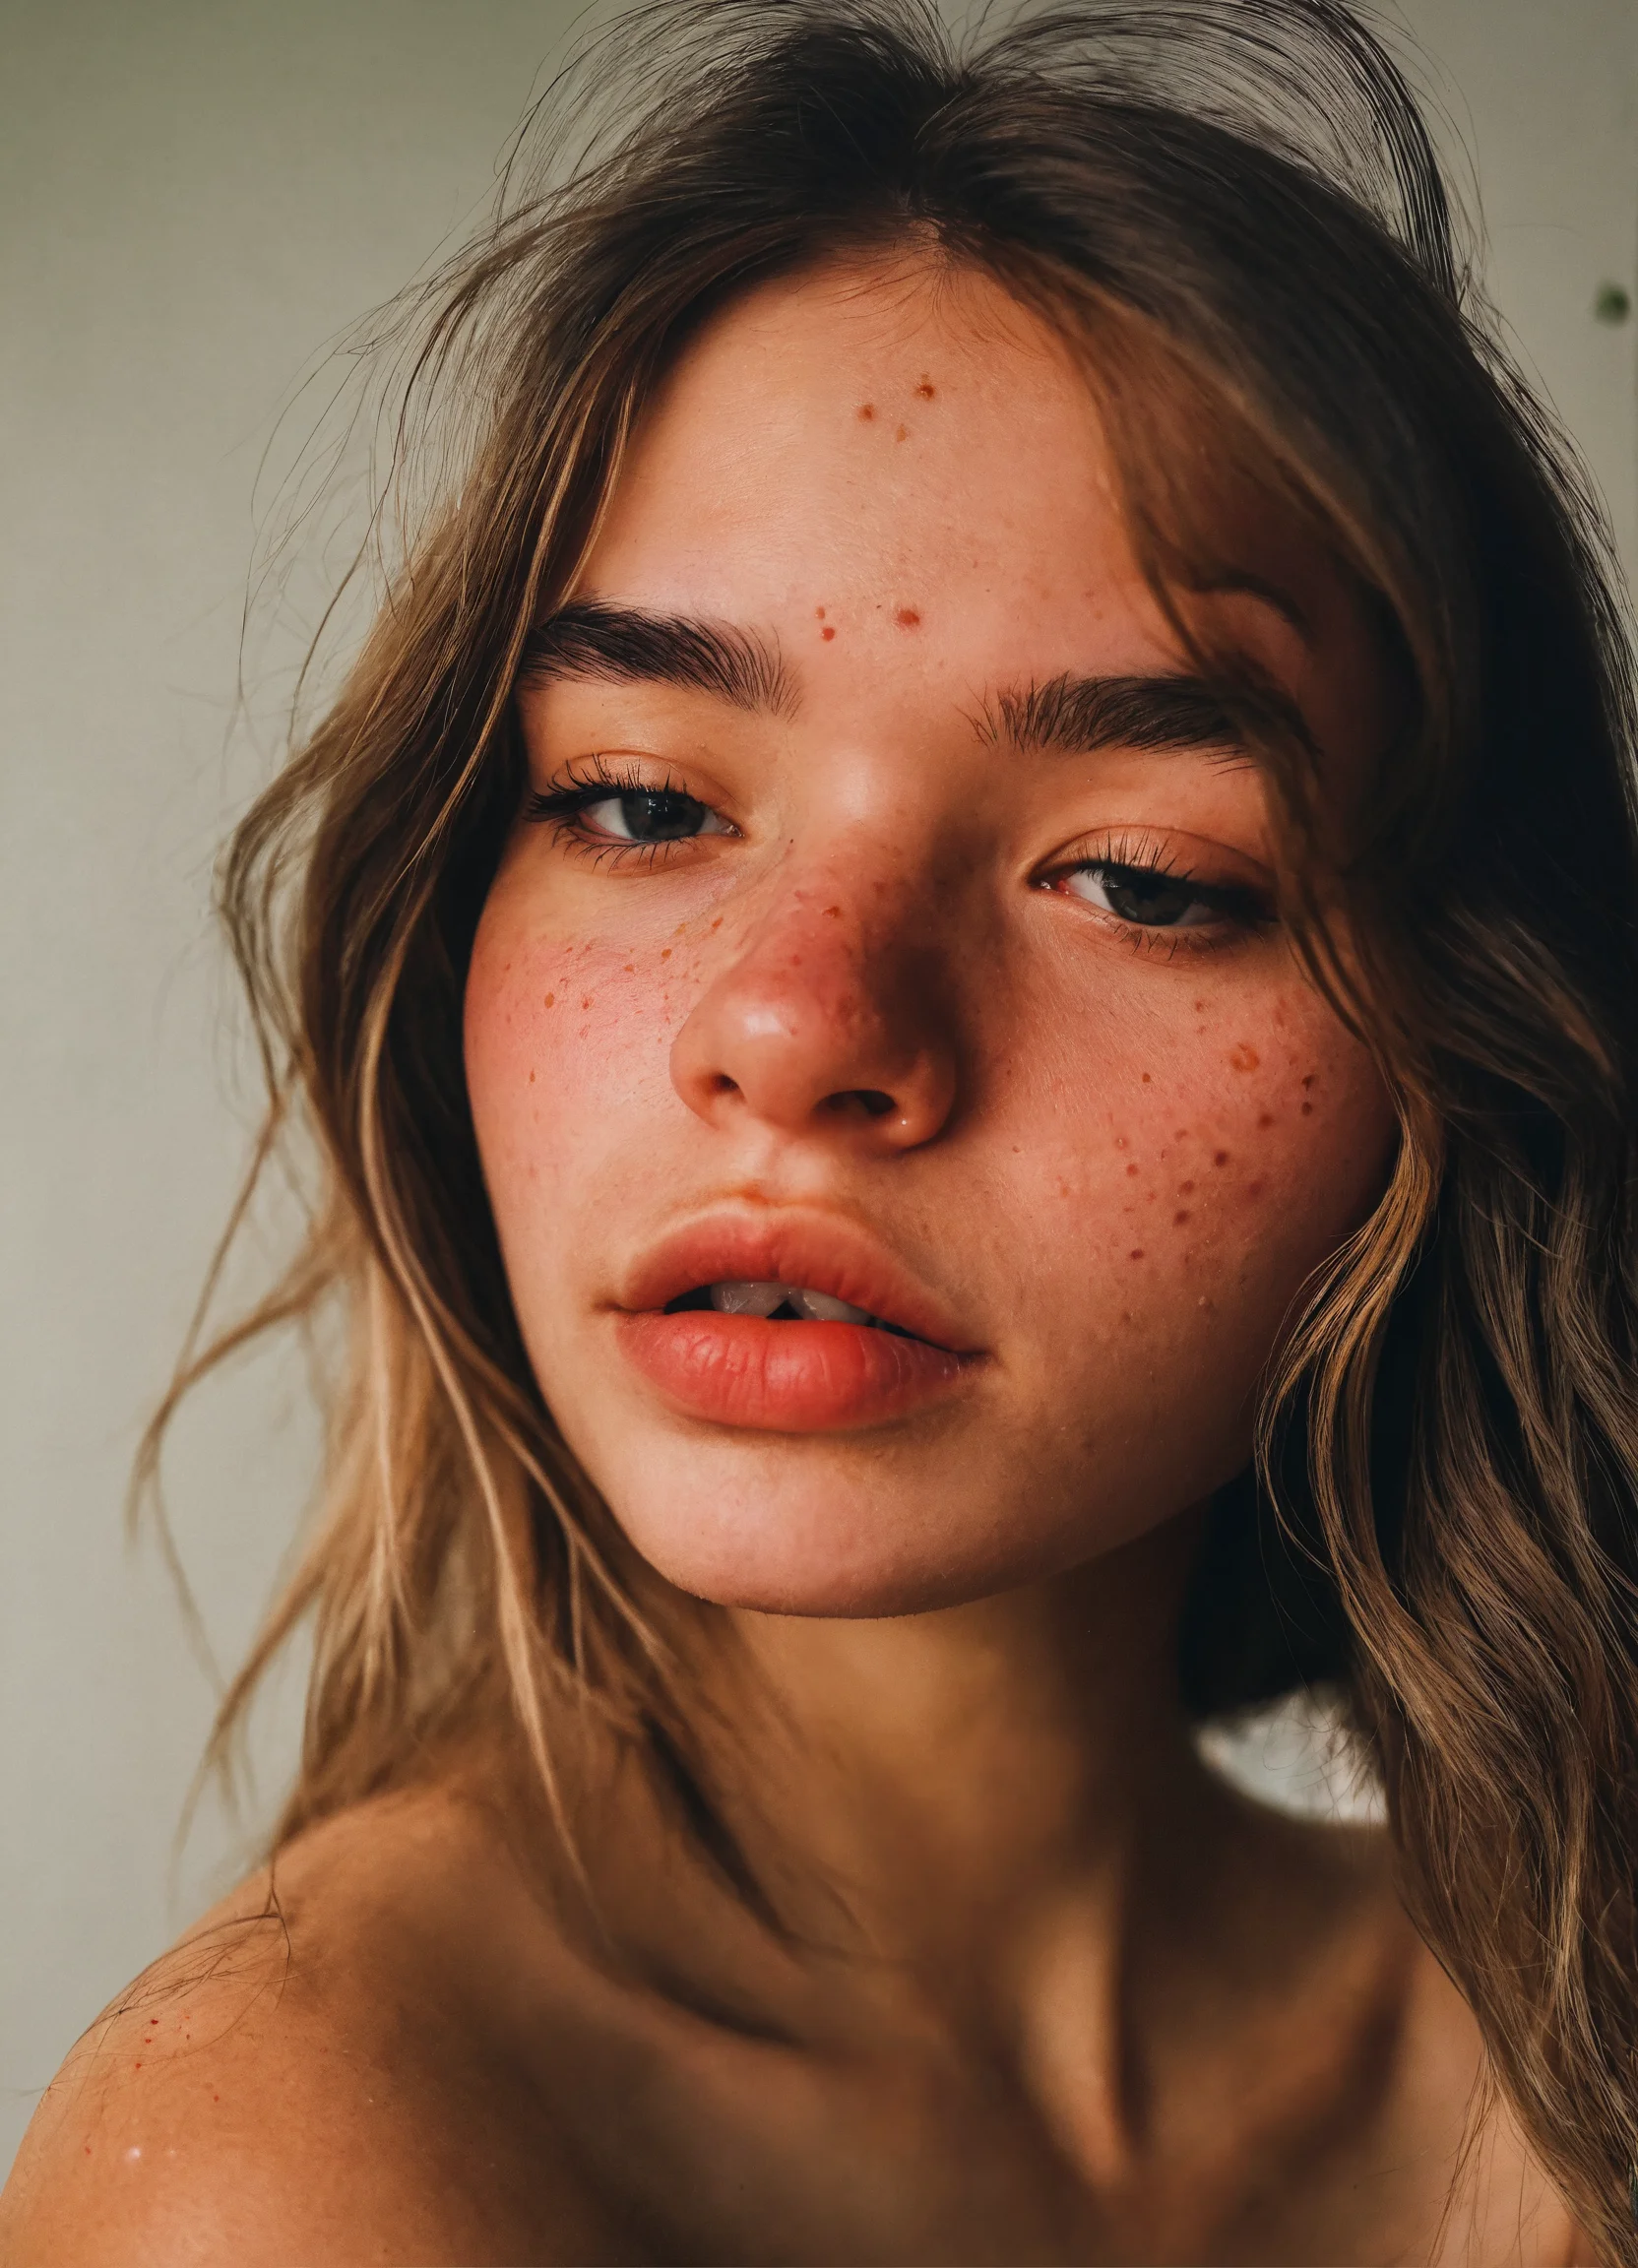 Q: What causes acne (pimples)?